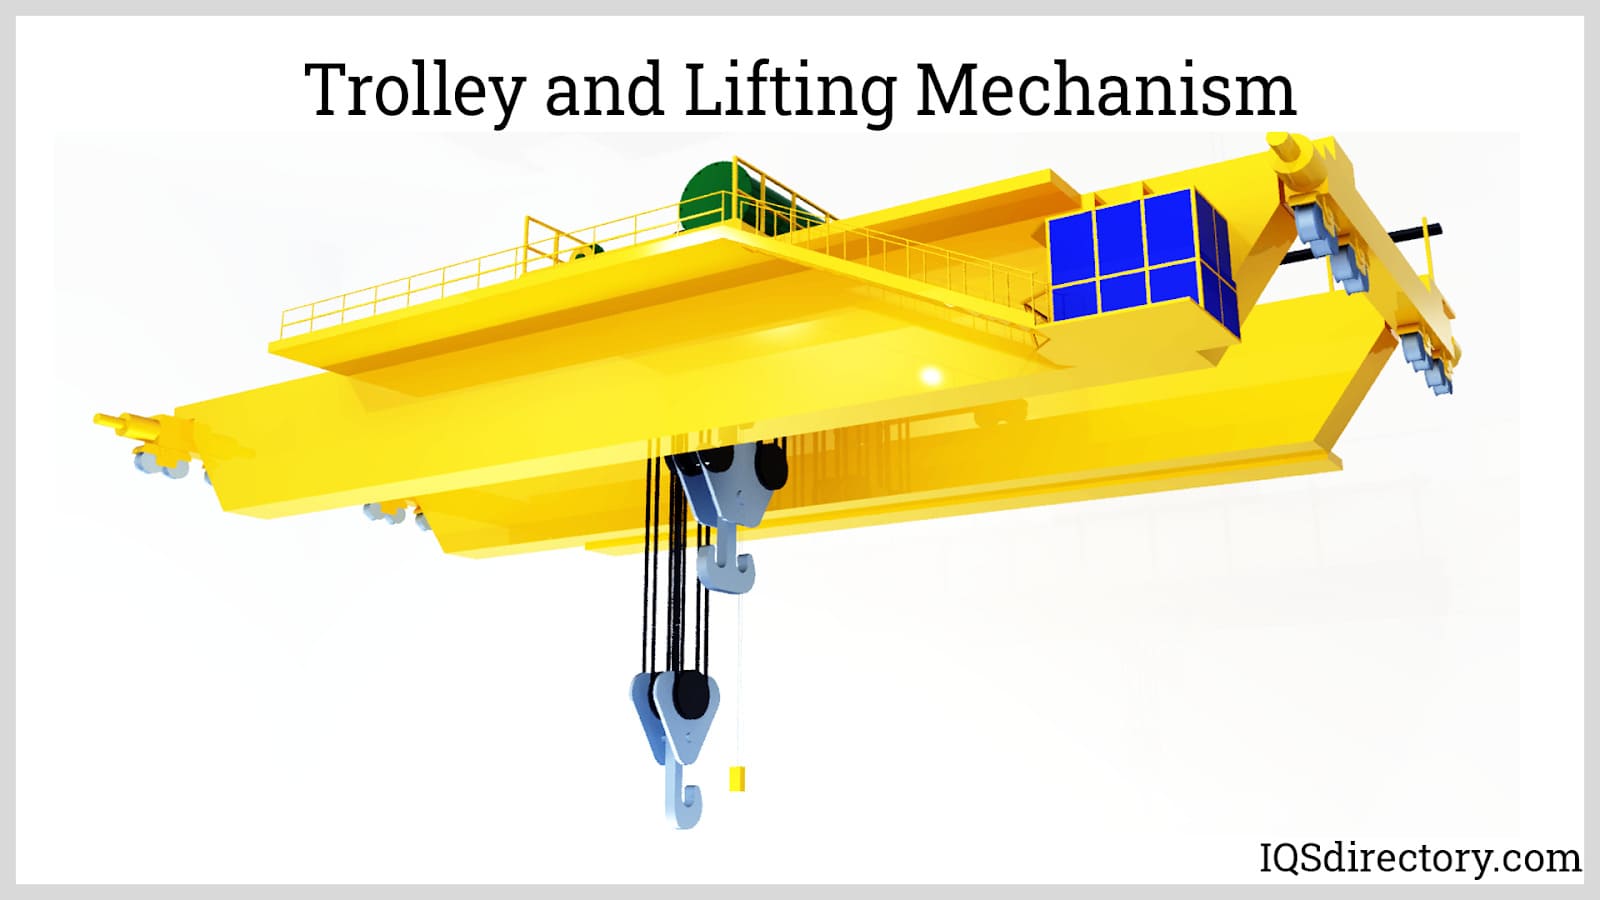 Trolley and Lifting Mechanism